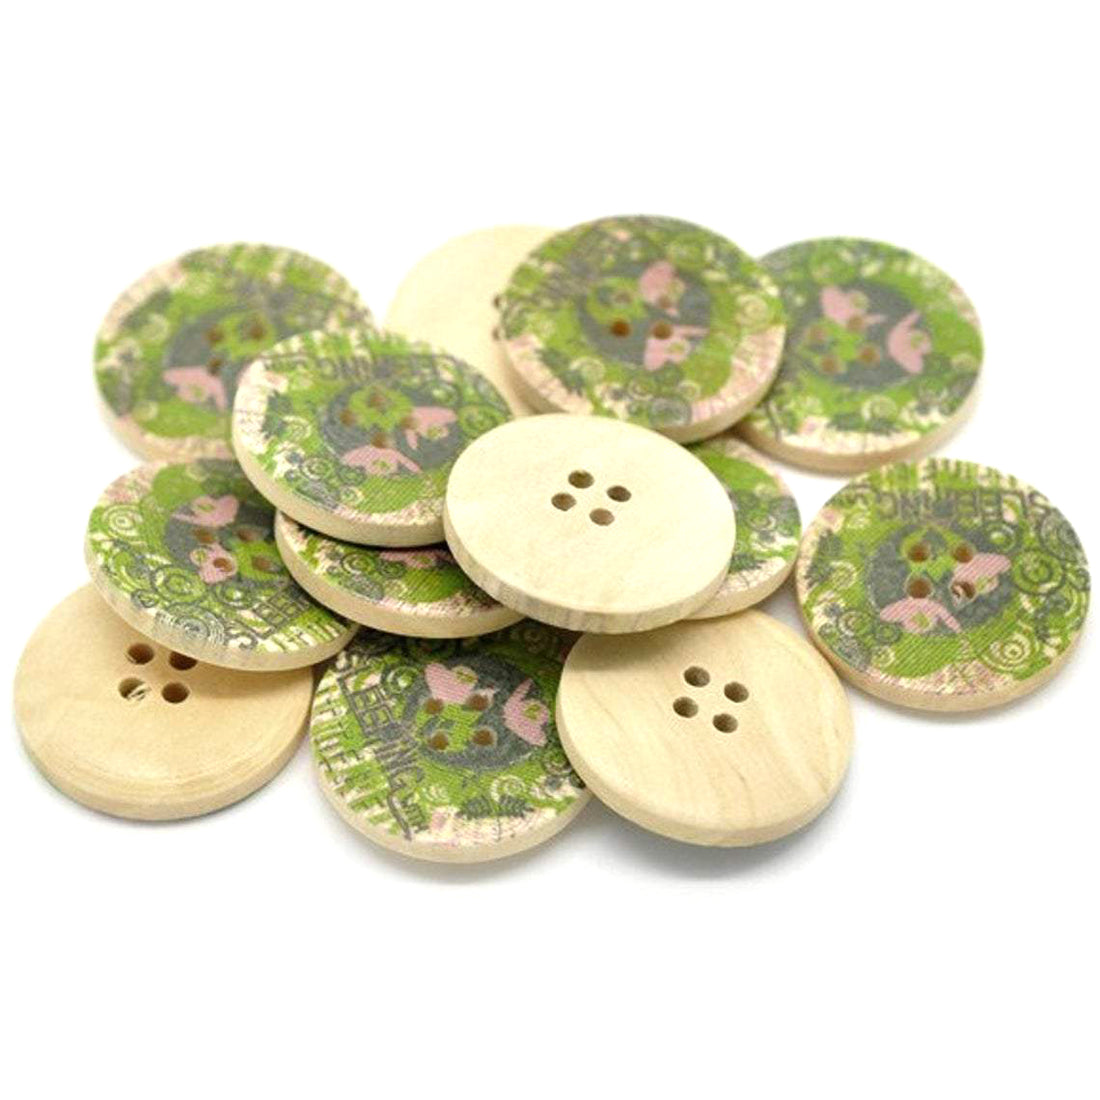 Olive Green and Pink Flower Pattern Wooden Sewing Buttons 3cm - Natural wood button set of 6